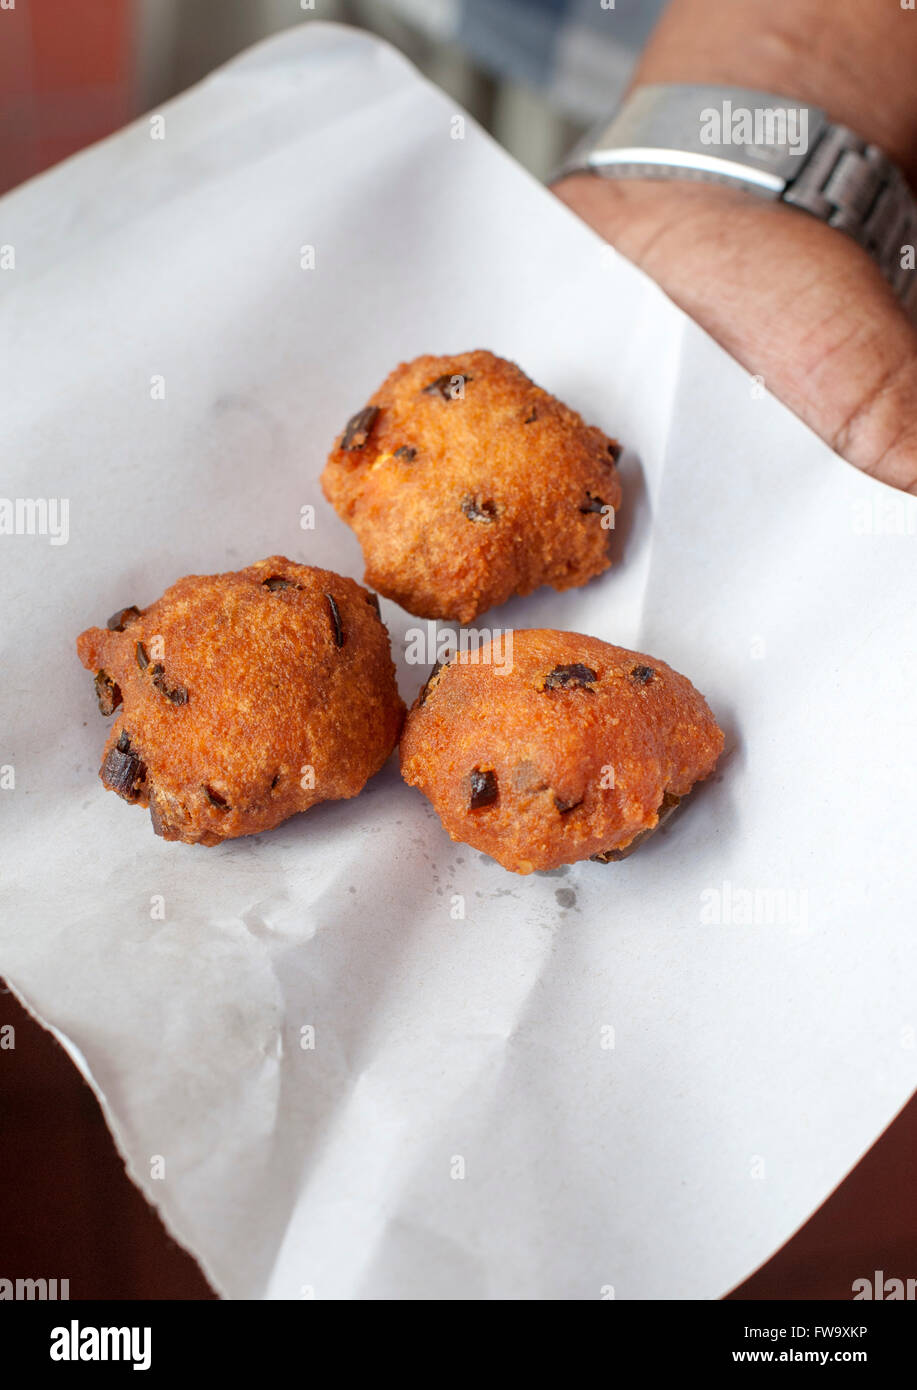 Gateaux piment, a savoury food in Mauritius. Stock Photo